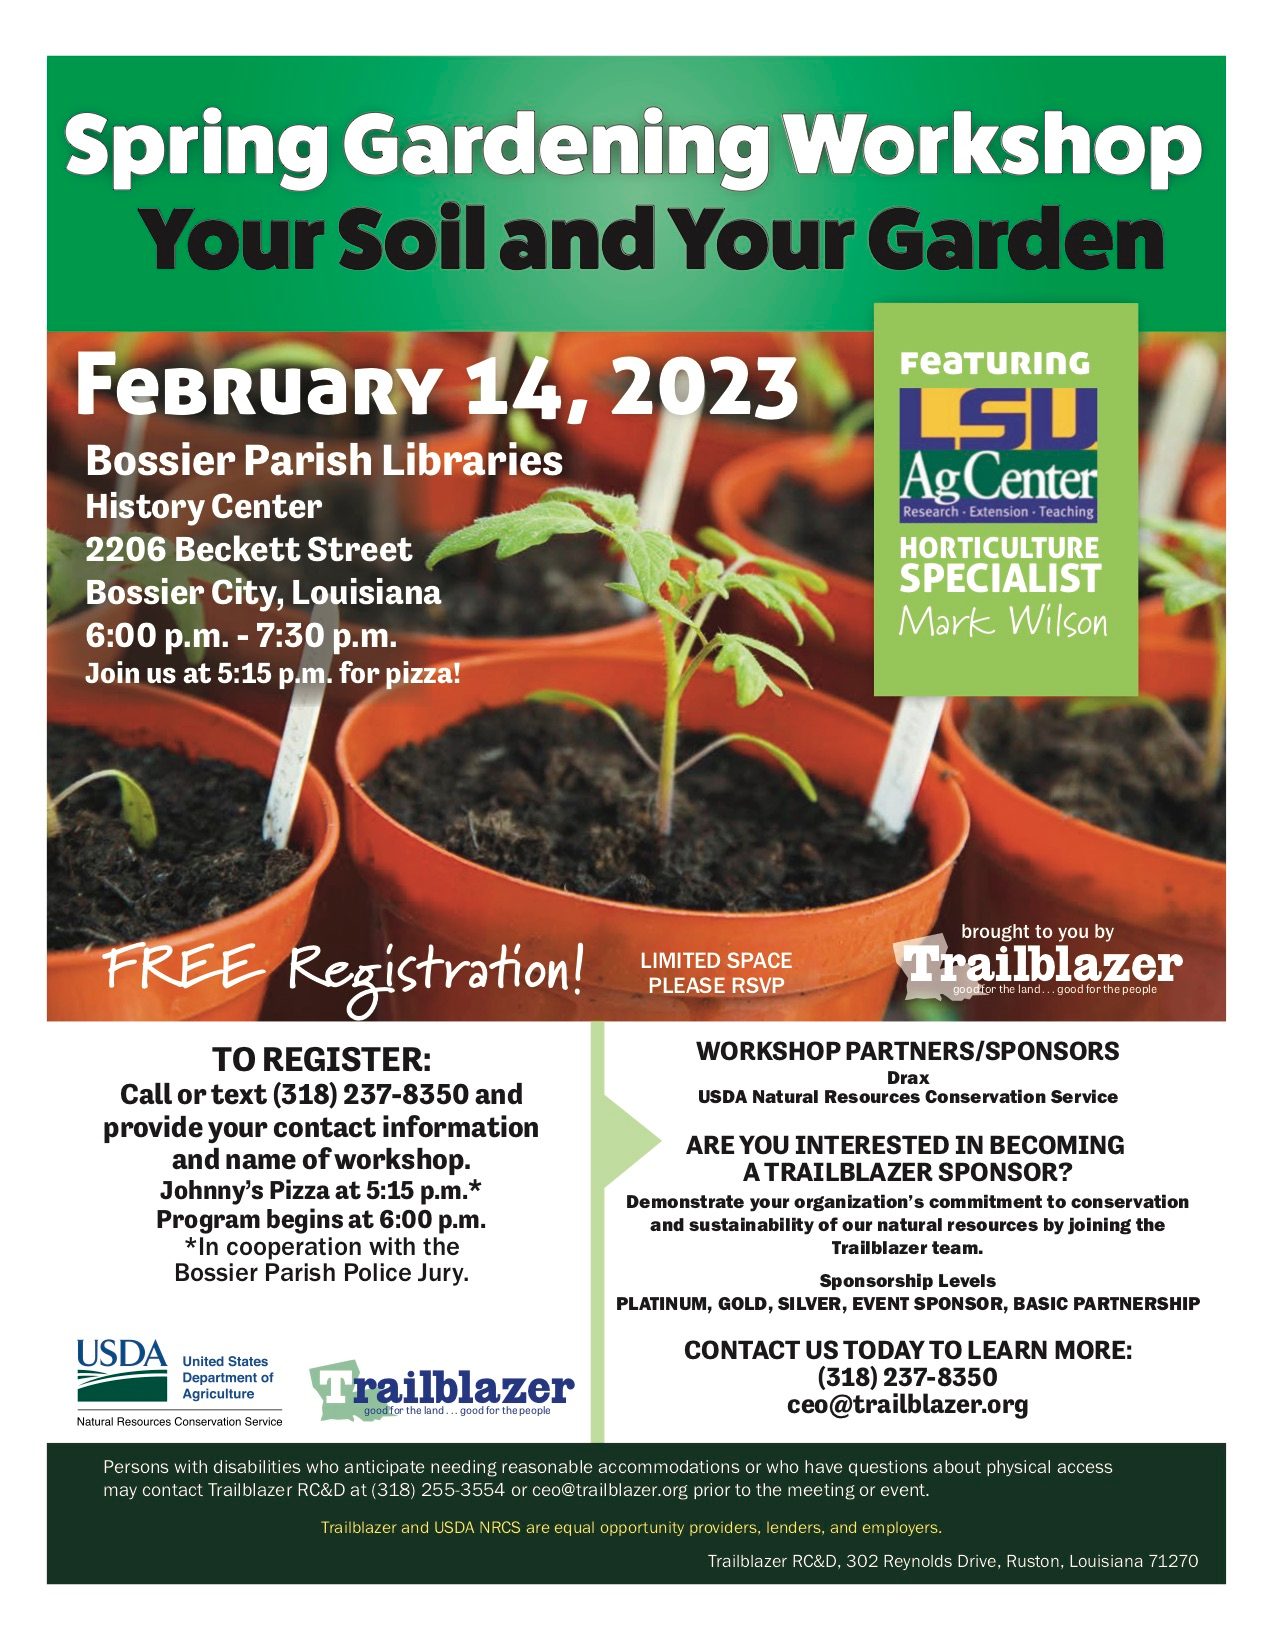 Promotional flyer with gardening image